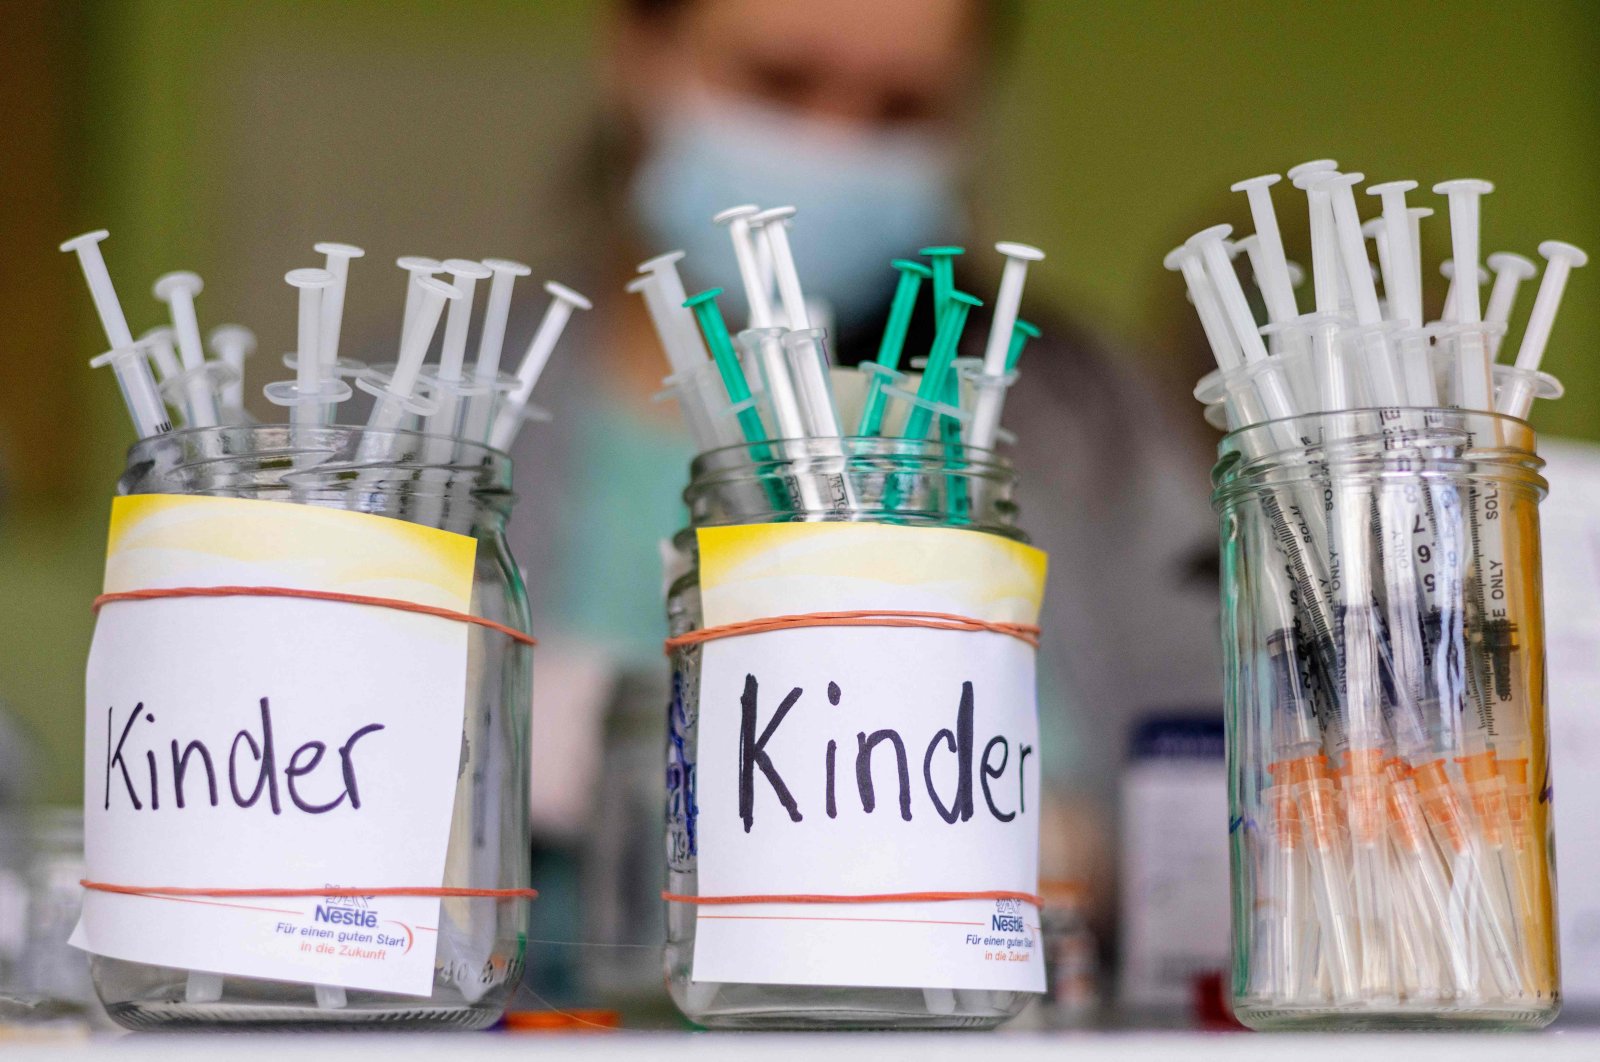 Syringes filled with the Pfizer-BioNTech coronavirus vaccine are pictured during a vaccination campaign for children, in Berlin, Germany, Jan. 8, 2022. (AFP Photo)